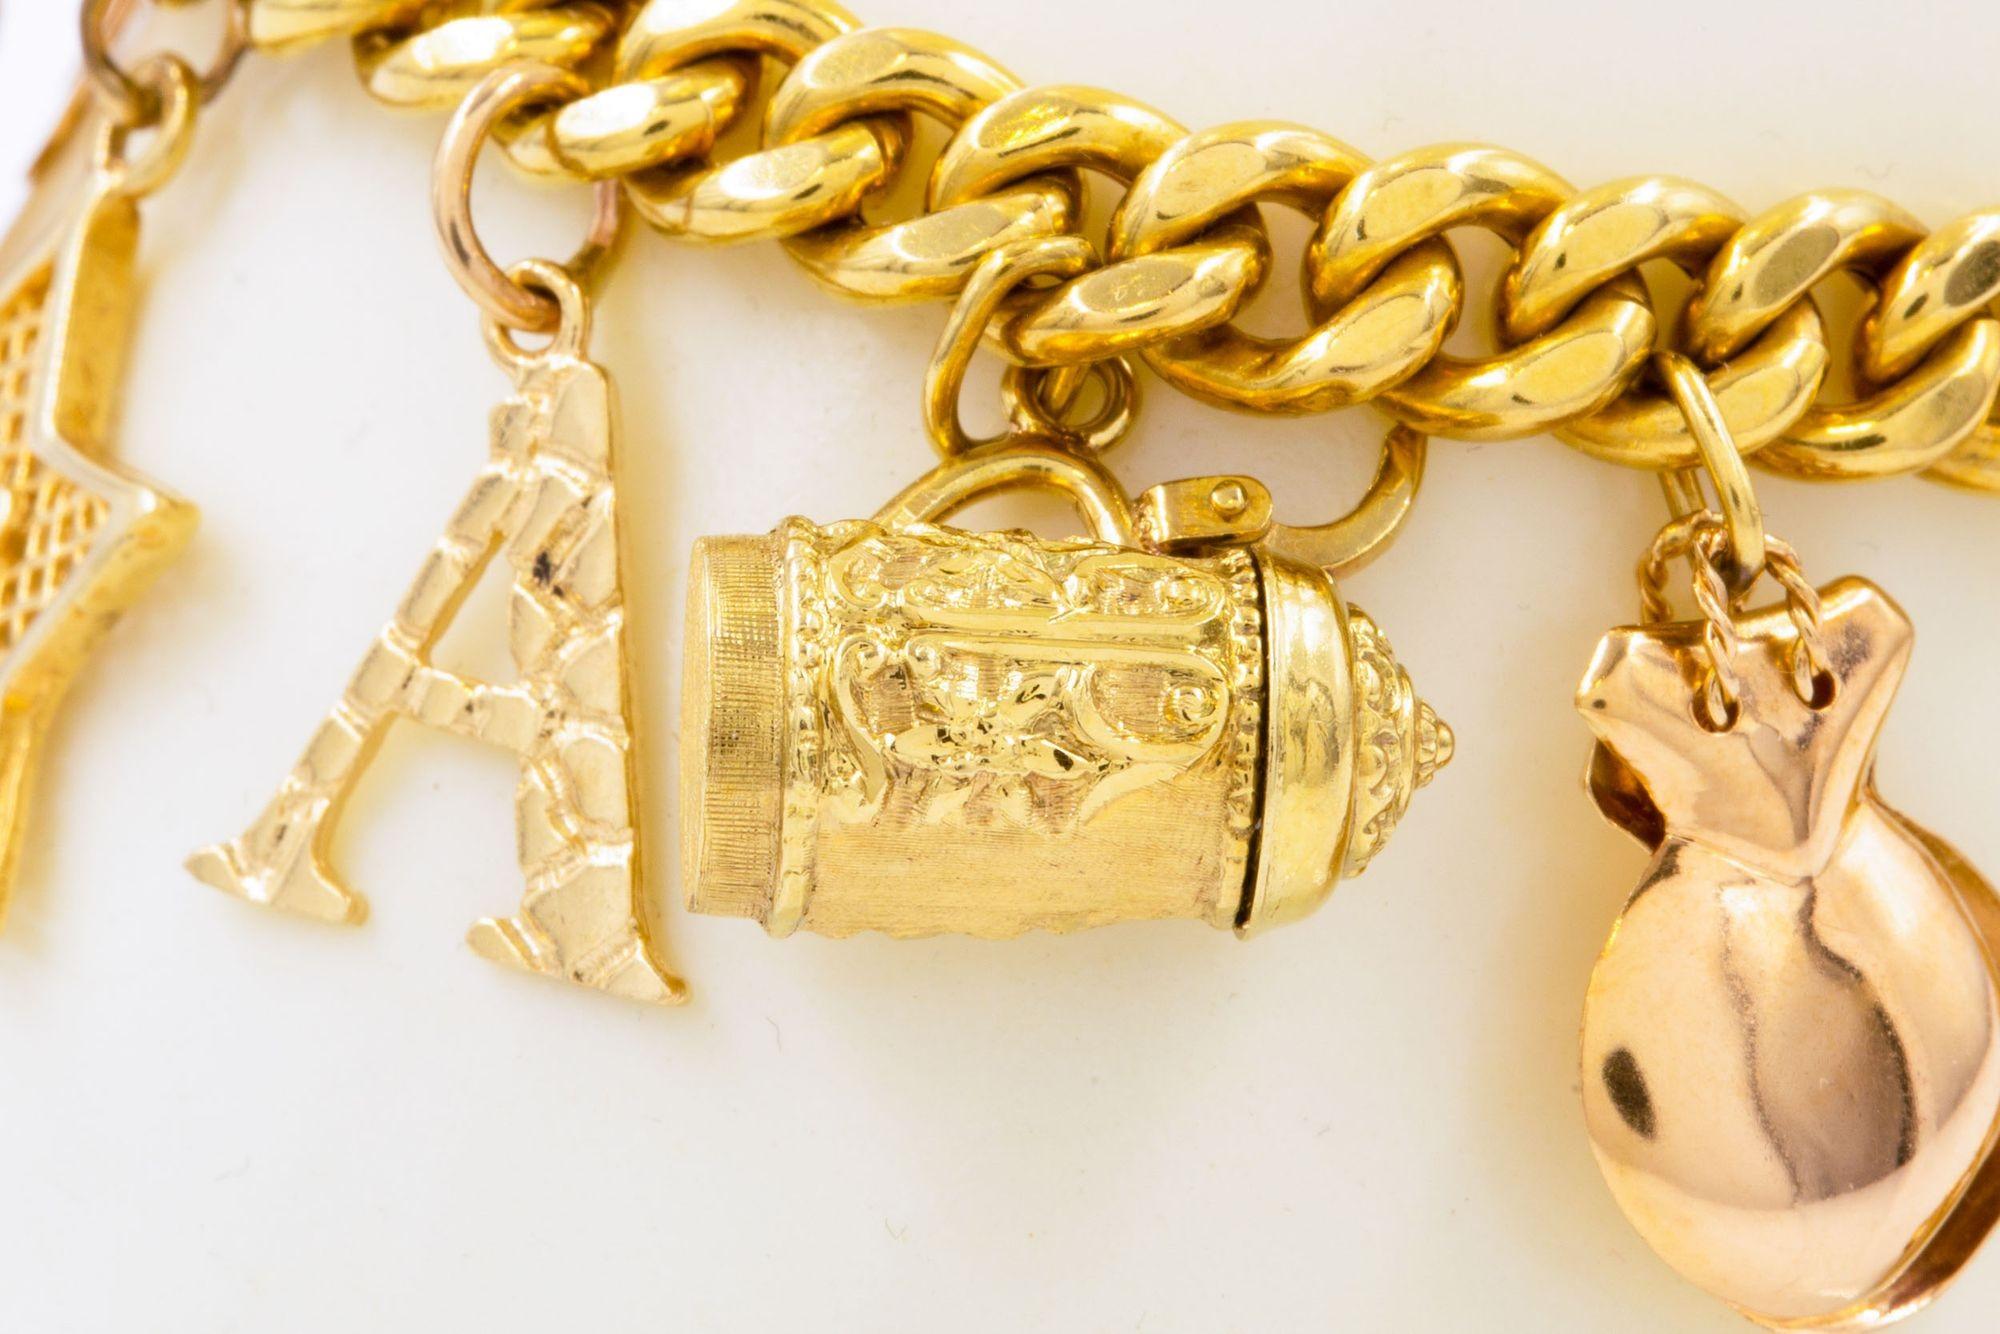 An attractive and substantial vintage 18 karat gold cuban-link bracelet with a series of included 14 karat gold charms: a house (the floor of which can be opened to reveal the hollowed interior and a pair of red hearts), the Spanish Cross with an